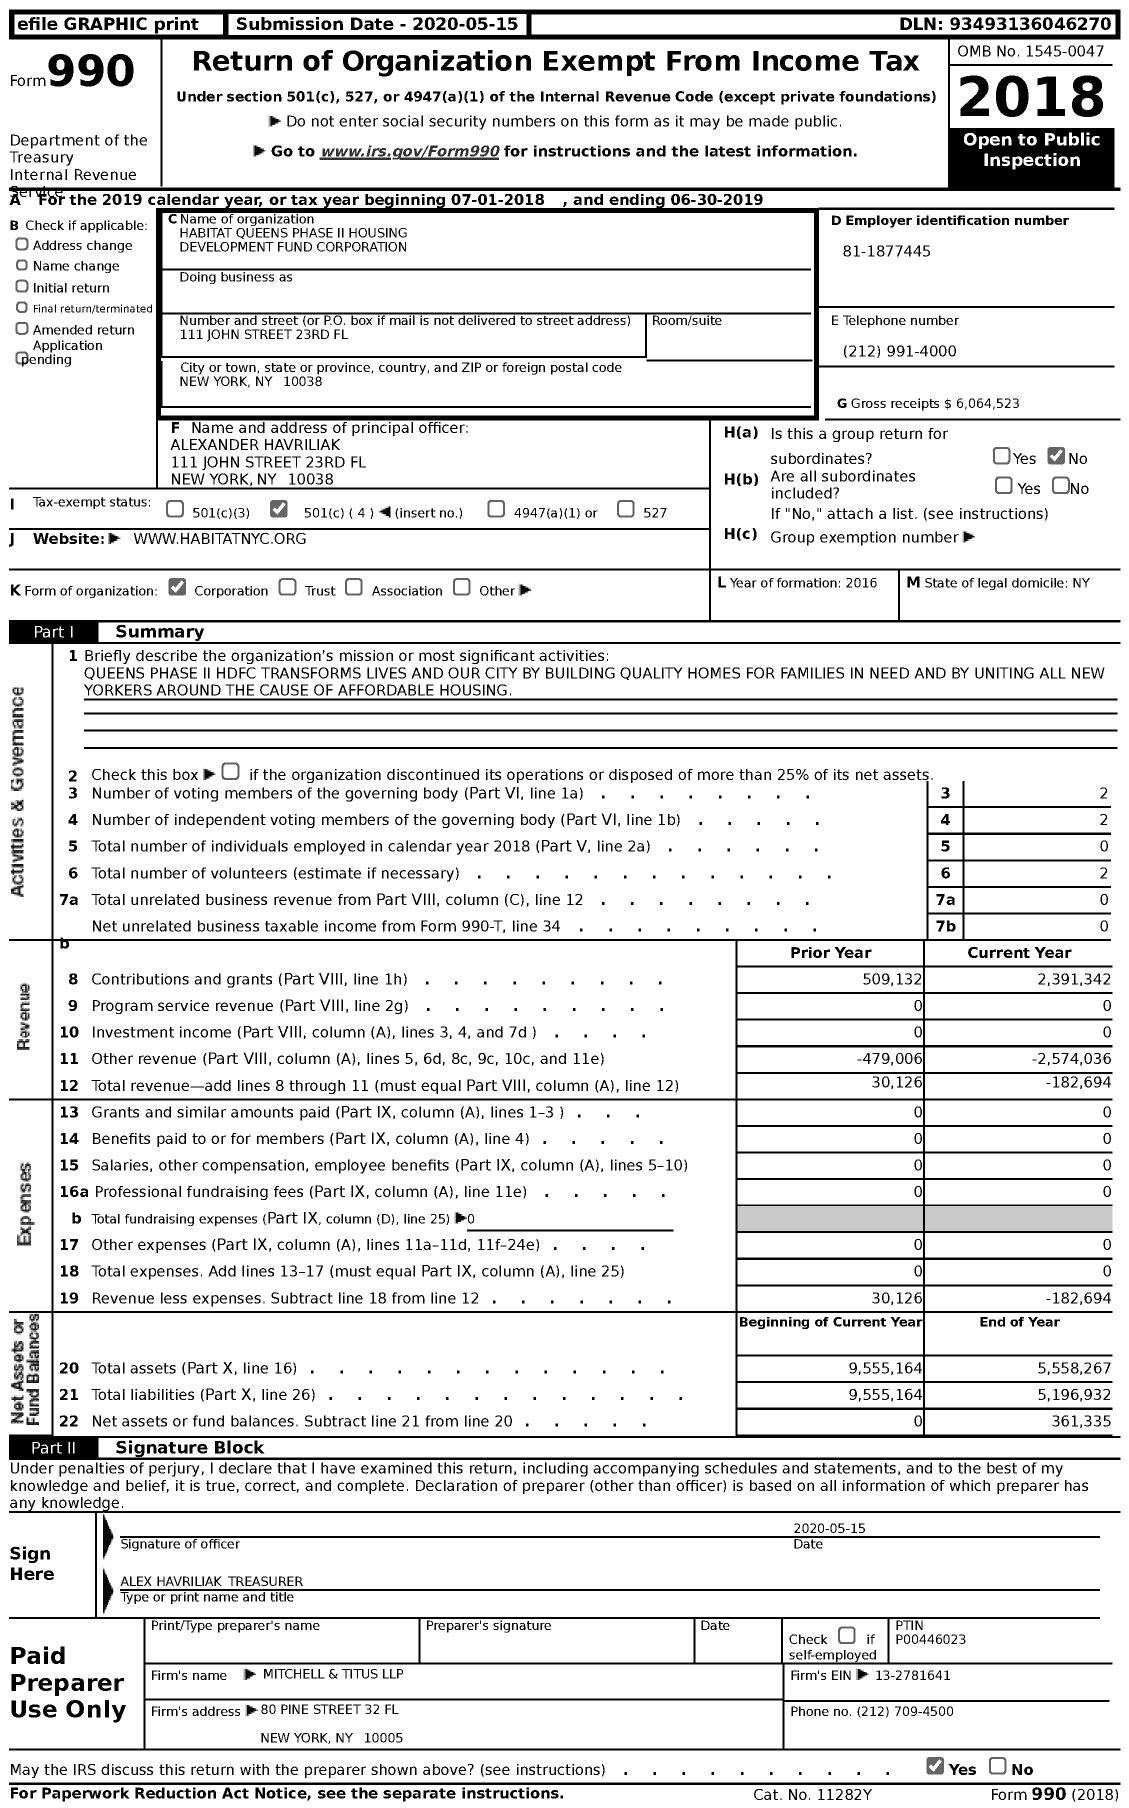 Image of first page of 2018 Form 990 for Habitat Queens Phase Ii Housing Development Fund Corporation